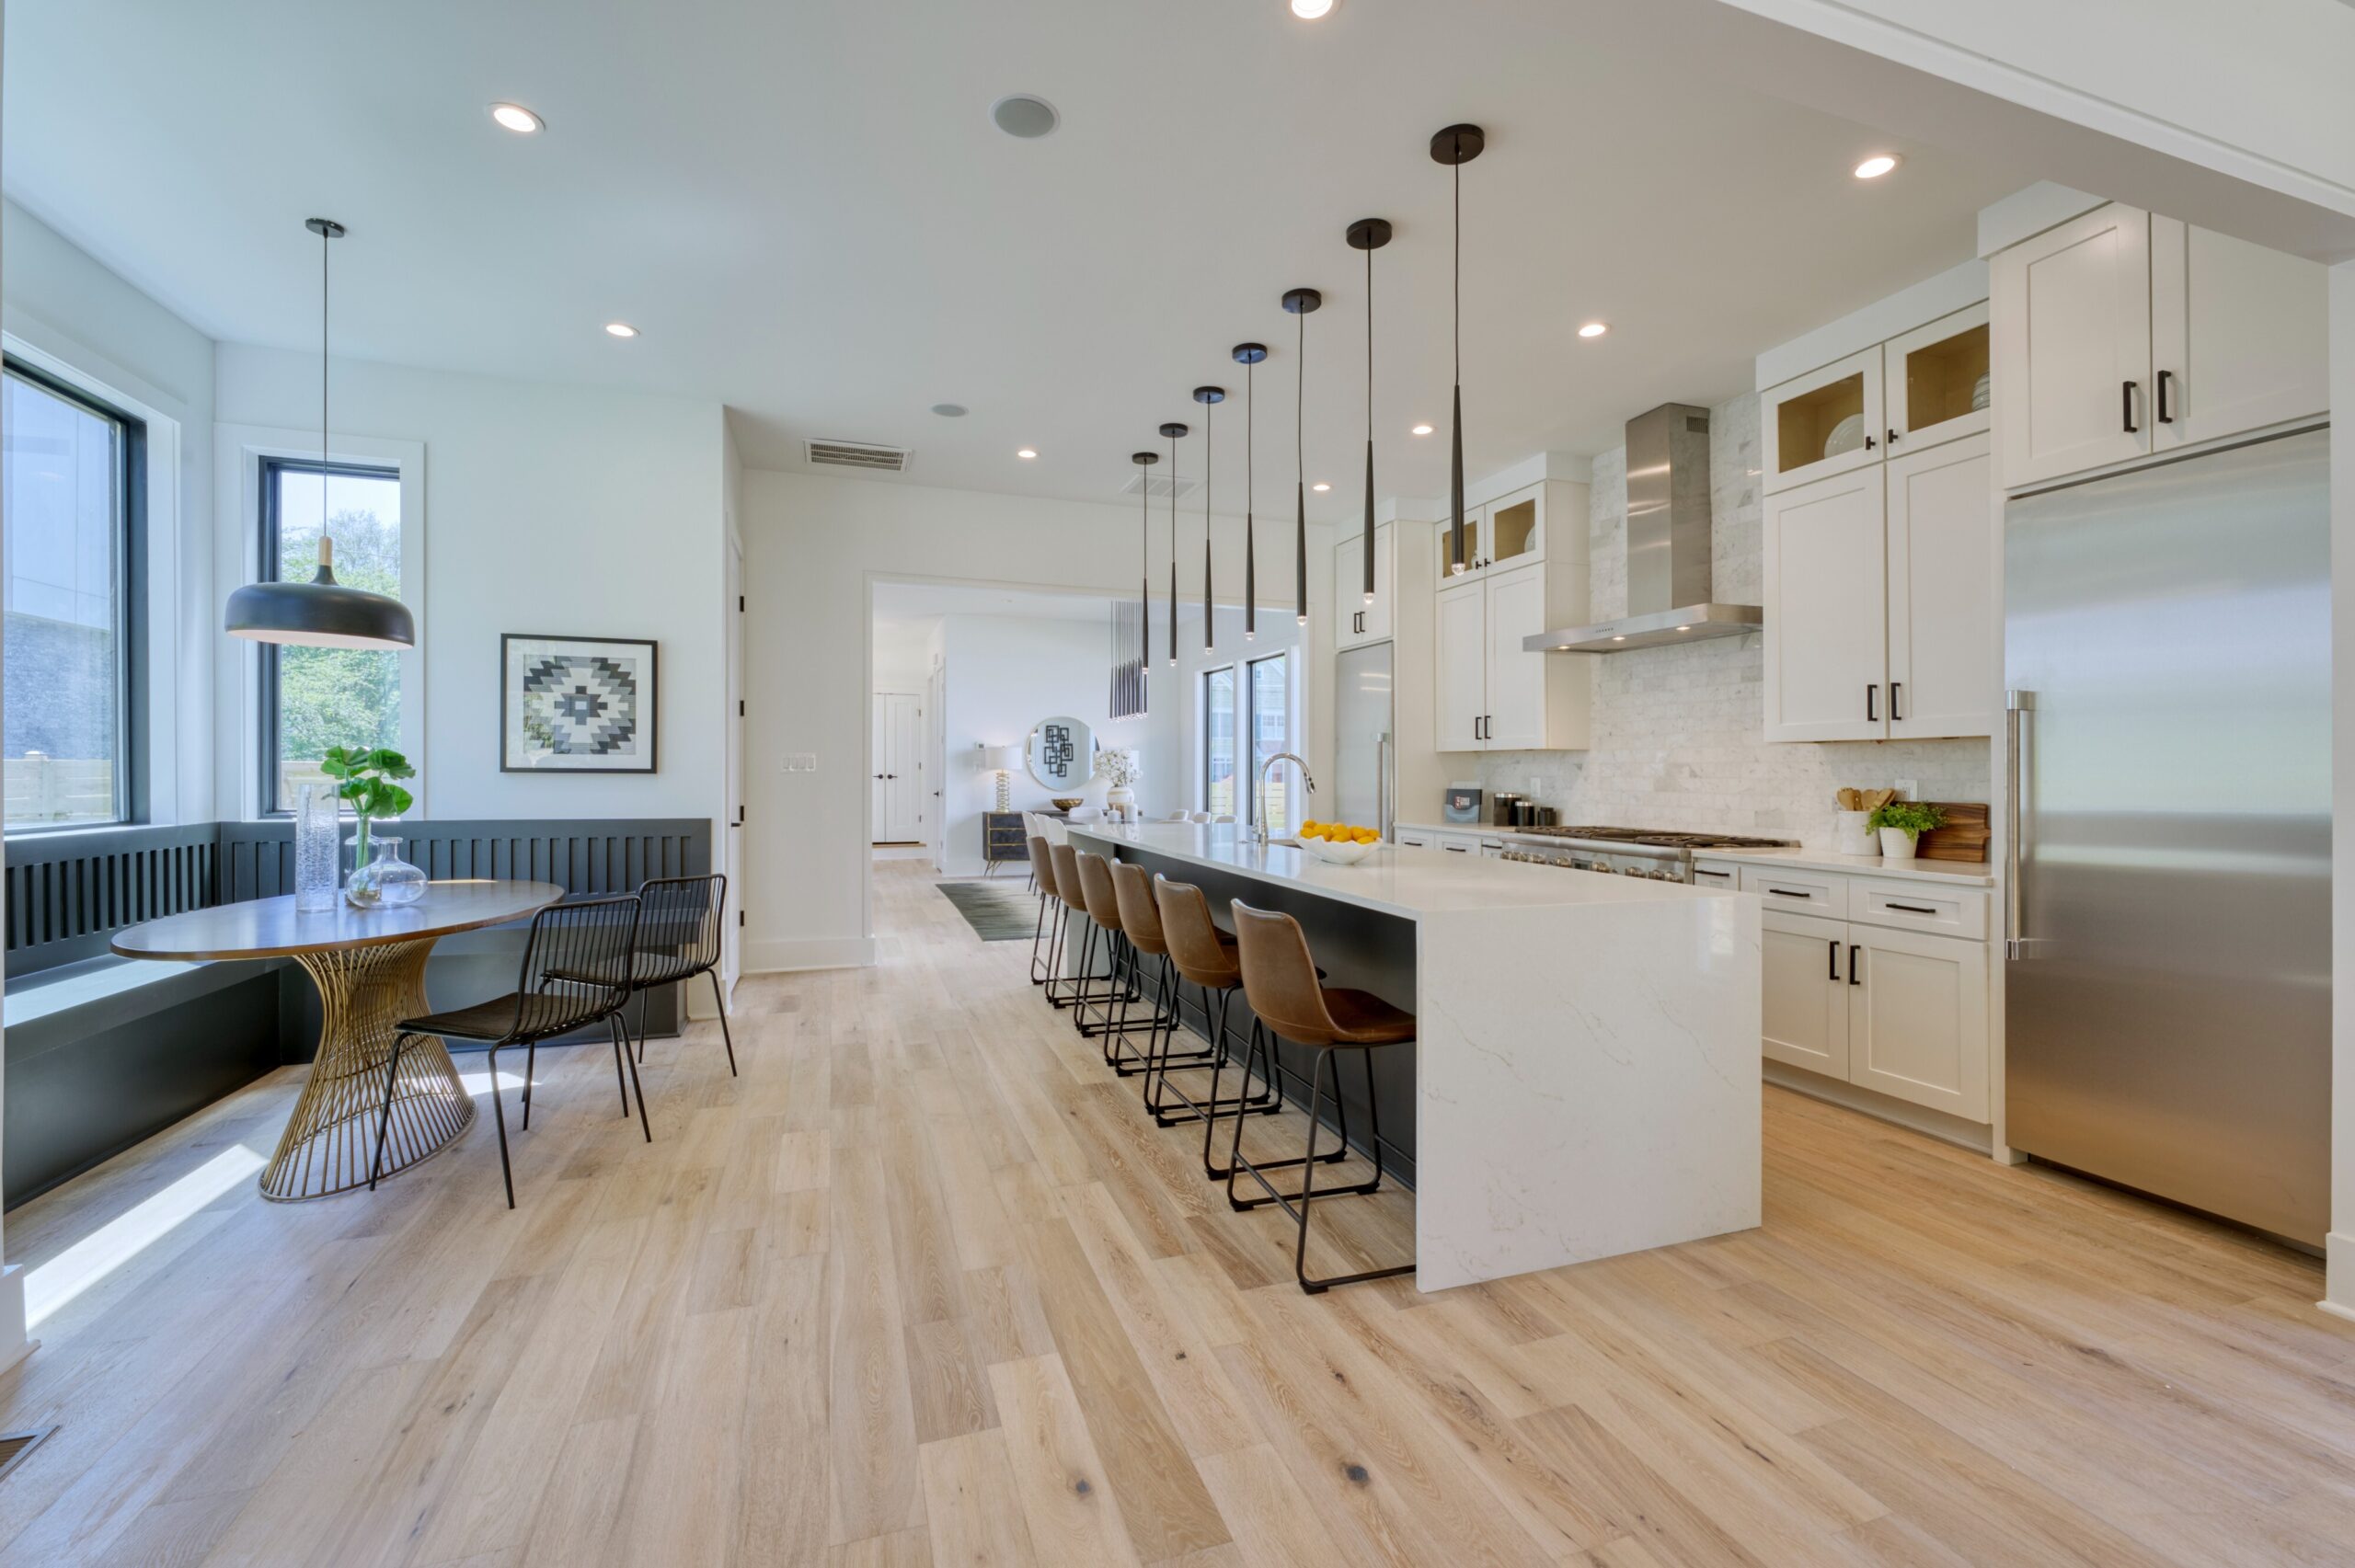 Professional interior photo of 1137 Buchanan St in McLean, VA - showing the kitchen and breakfast area, with built in benches for the breakfast nook, large waterfall island and white quartz custom kitchen